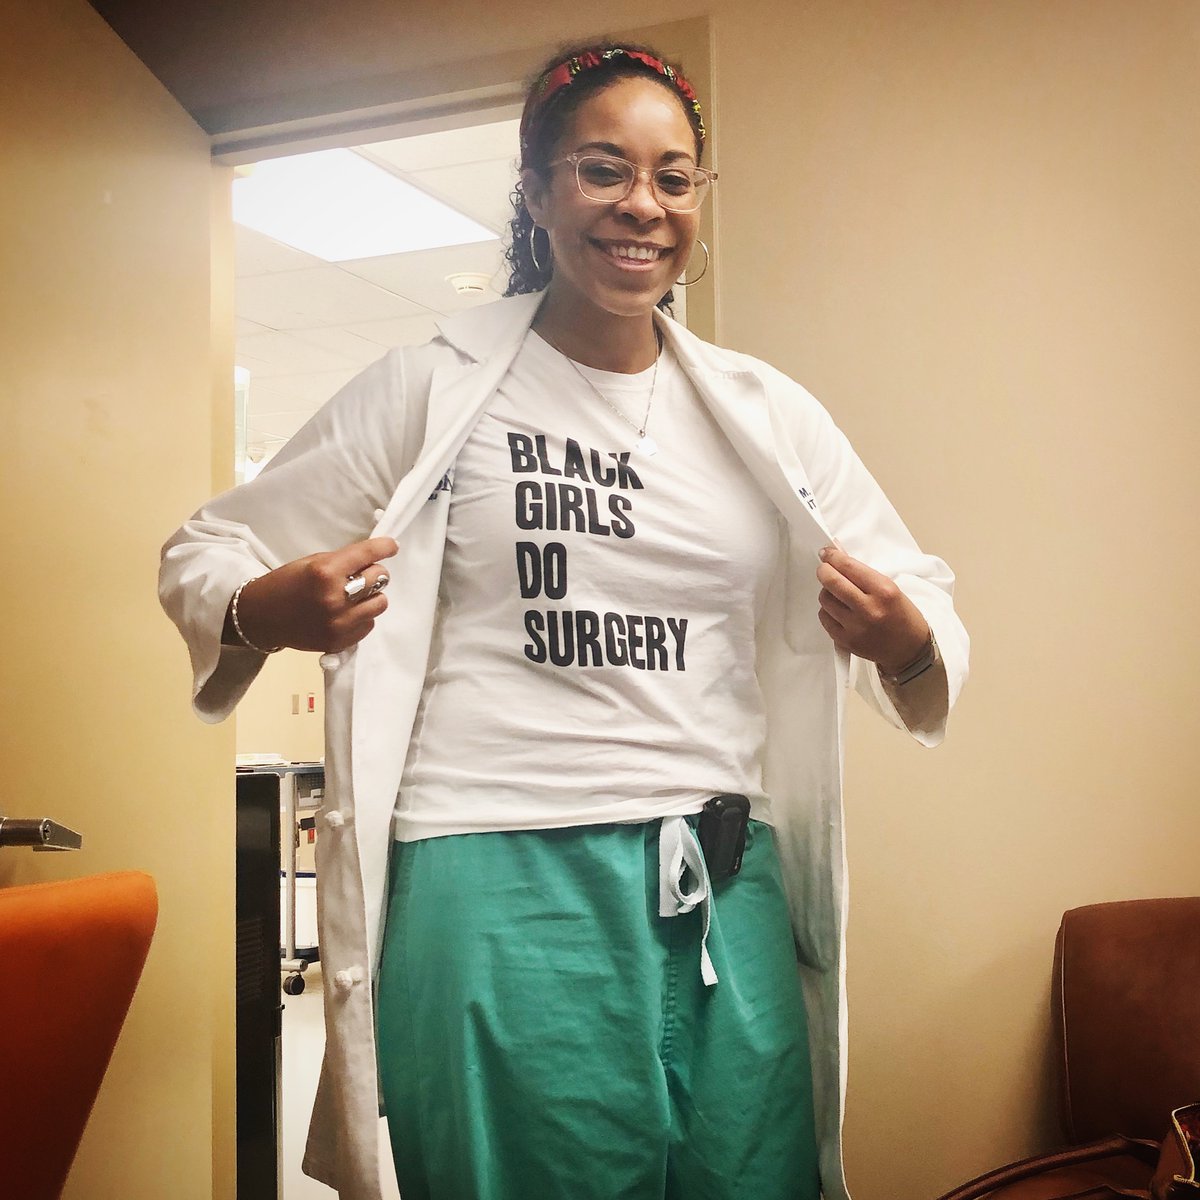 When your last day of general surgery residency falls on Juneteenth, THIS is how you show up to work ✊🏾👩🏾‍⚕️🔪